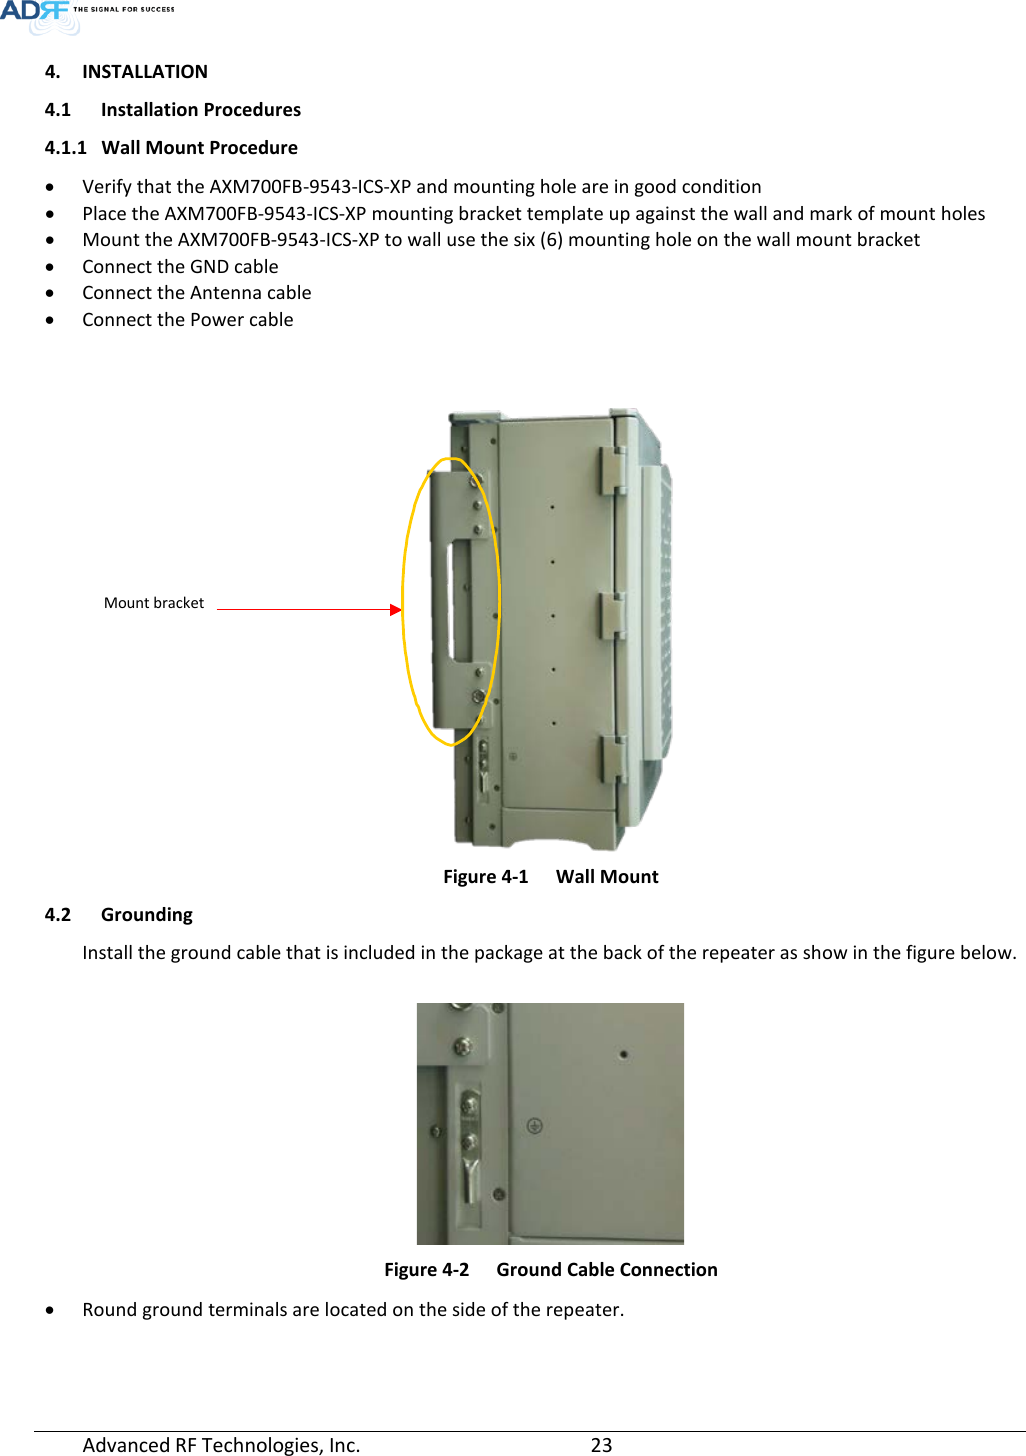  Advanced RF Technologies, Inc.       23   4. INSTALLATION 4.1 Installation Procedures 4.1.1 Wall Mount Procedure • Verify that the AXM700FB-9543-ICS-XP and mounting hole are in good condition • Place the AXM700FB-9543-ICS-XP mounting bracket template up against the wall and mark of mount holes • Mount the AXM700FB-9543-ICS-XP to wall use the six (6) mounting hole on the wall mount bracket • Connect the GND cable • Connect the Antenna cable • Connect the Power cable    Figure 4-1  Wall Mount 4.2 Grounding Install the ground cable that is included in the package at the back of the repeater as show in the figure below.   Figure 4-2  Ground Cable Connection • Round ground terminals are located on the side of the repeater.     Mount bracket 